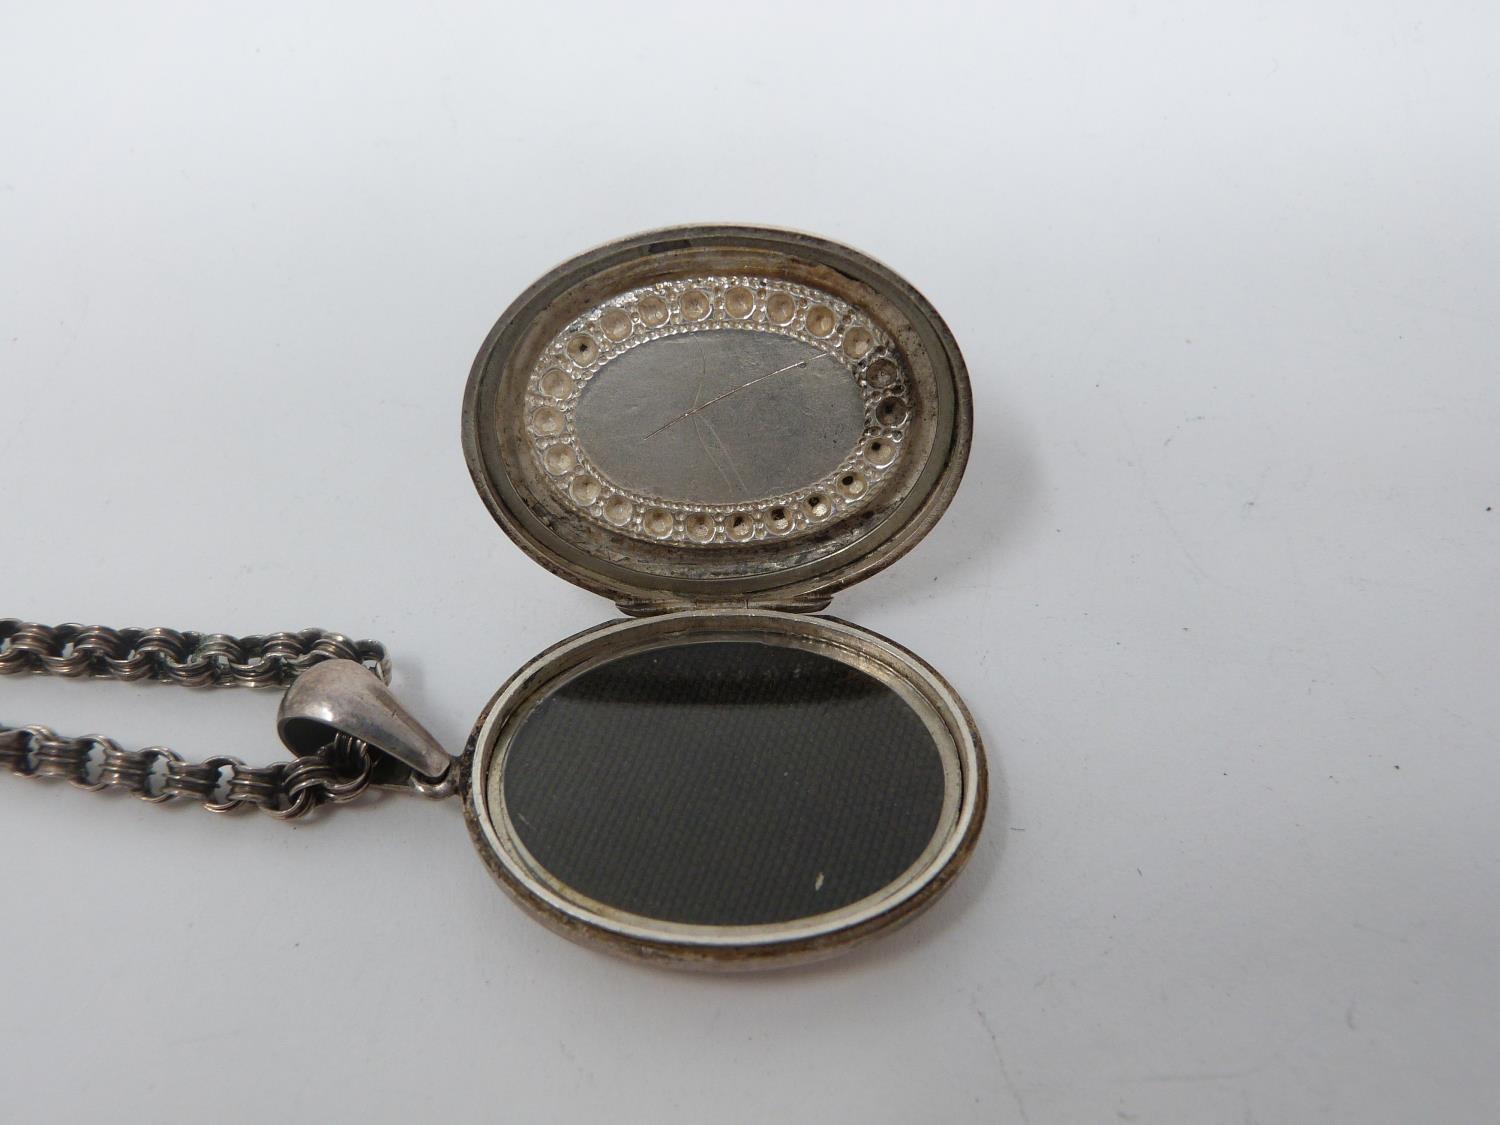 Two Victorian white metal book chains with lockets. One with a wide intricate book chain that - Image 13 of 14